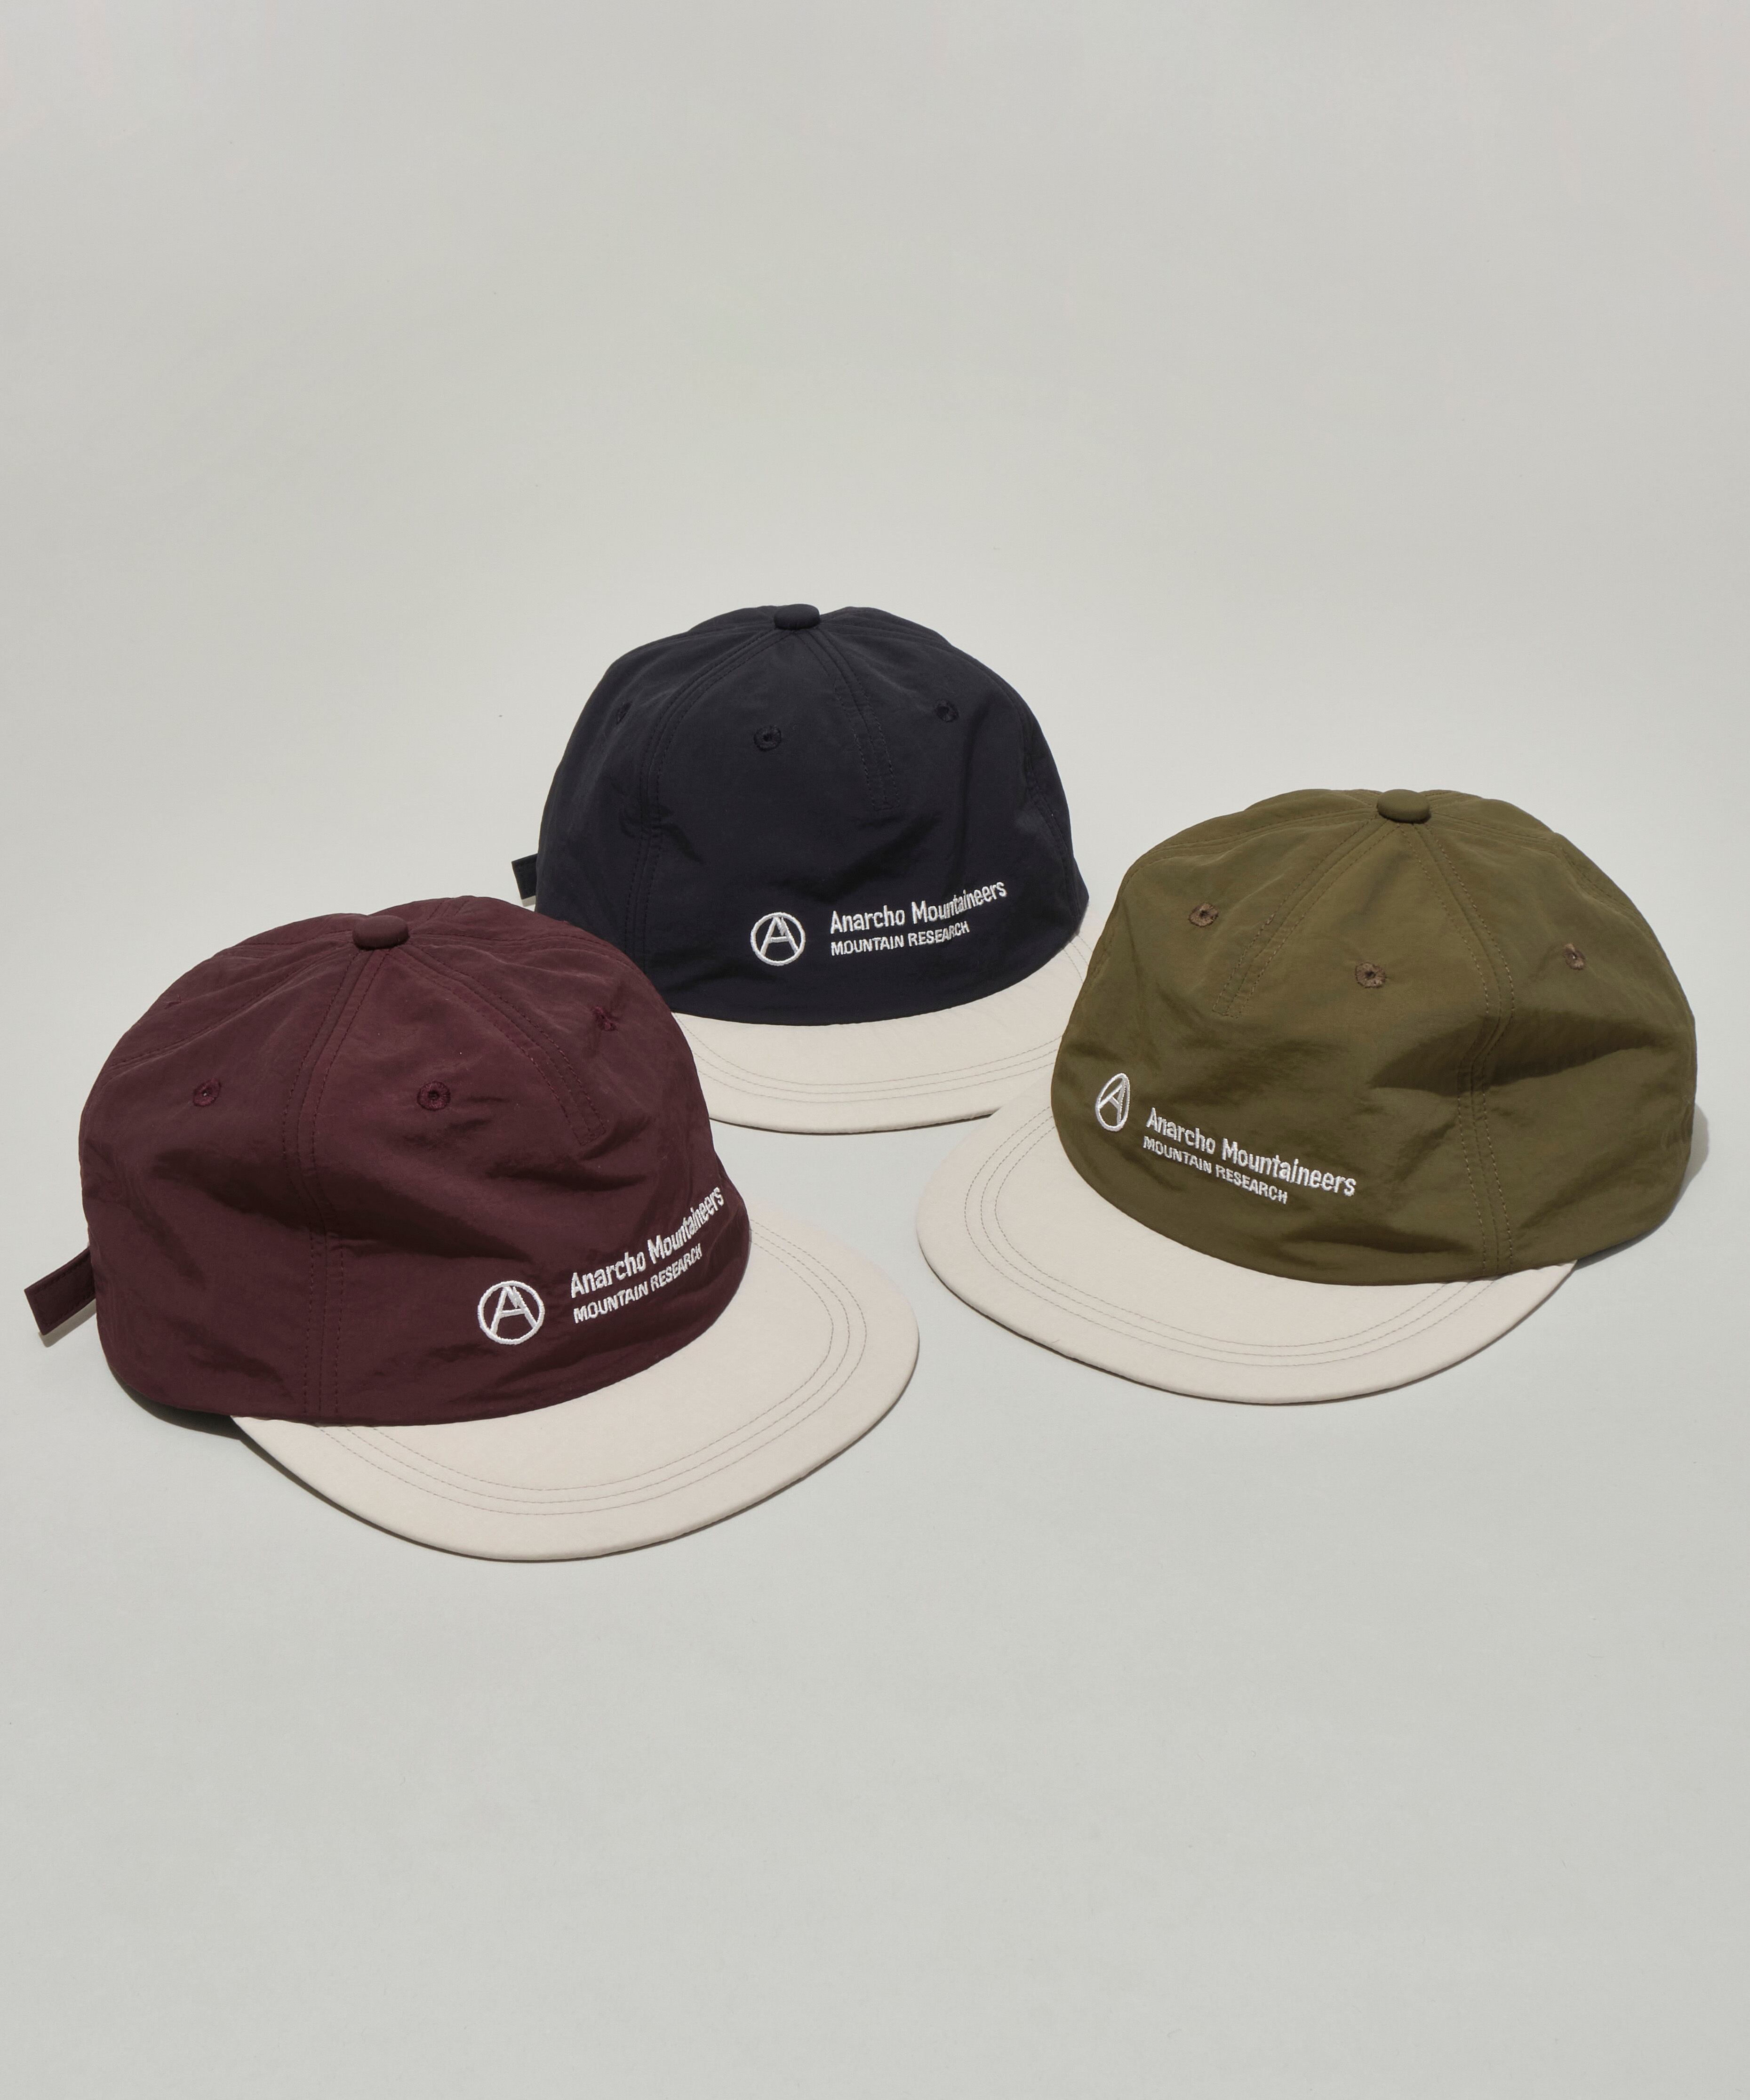 MOUNTAIN RESEARCH / A.M. CAP | st. valley house - セントバレーハウス powered by BASE